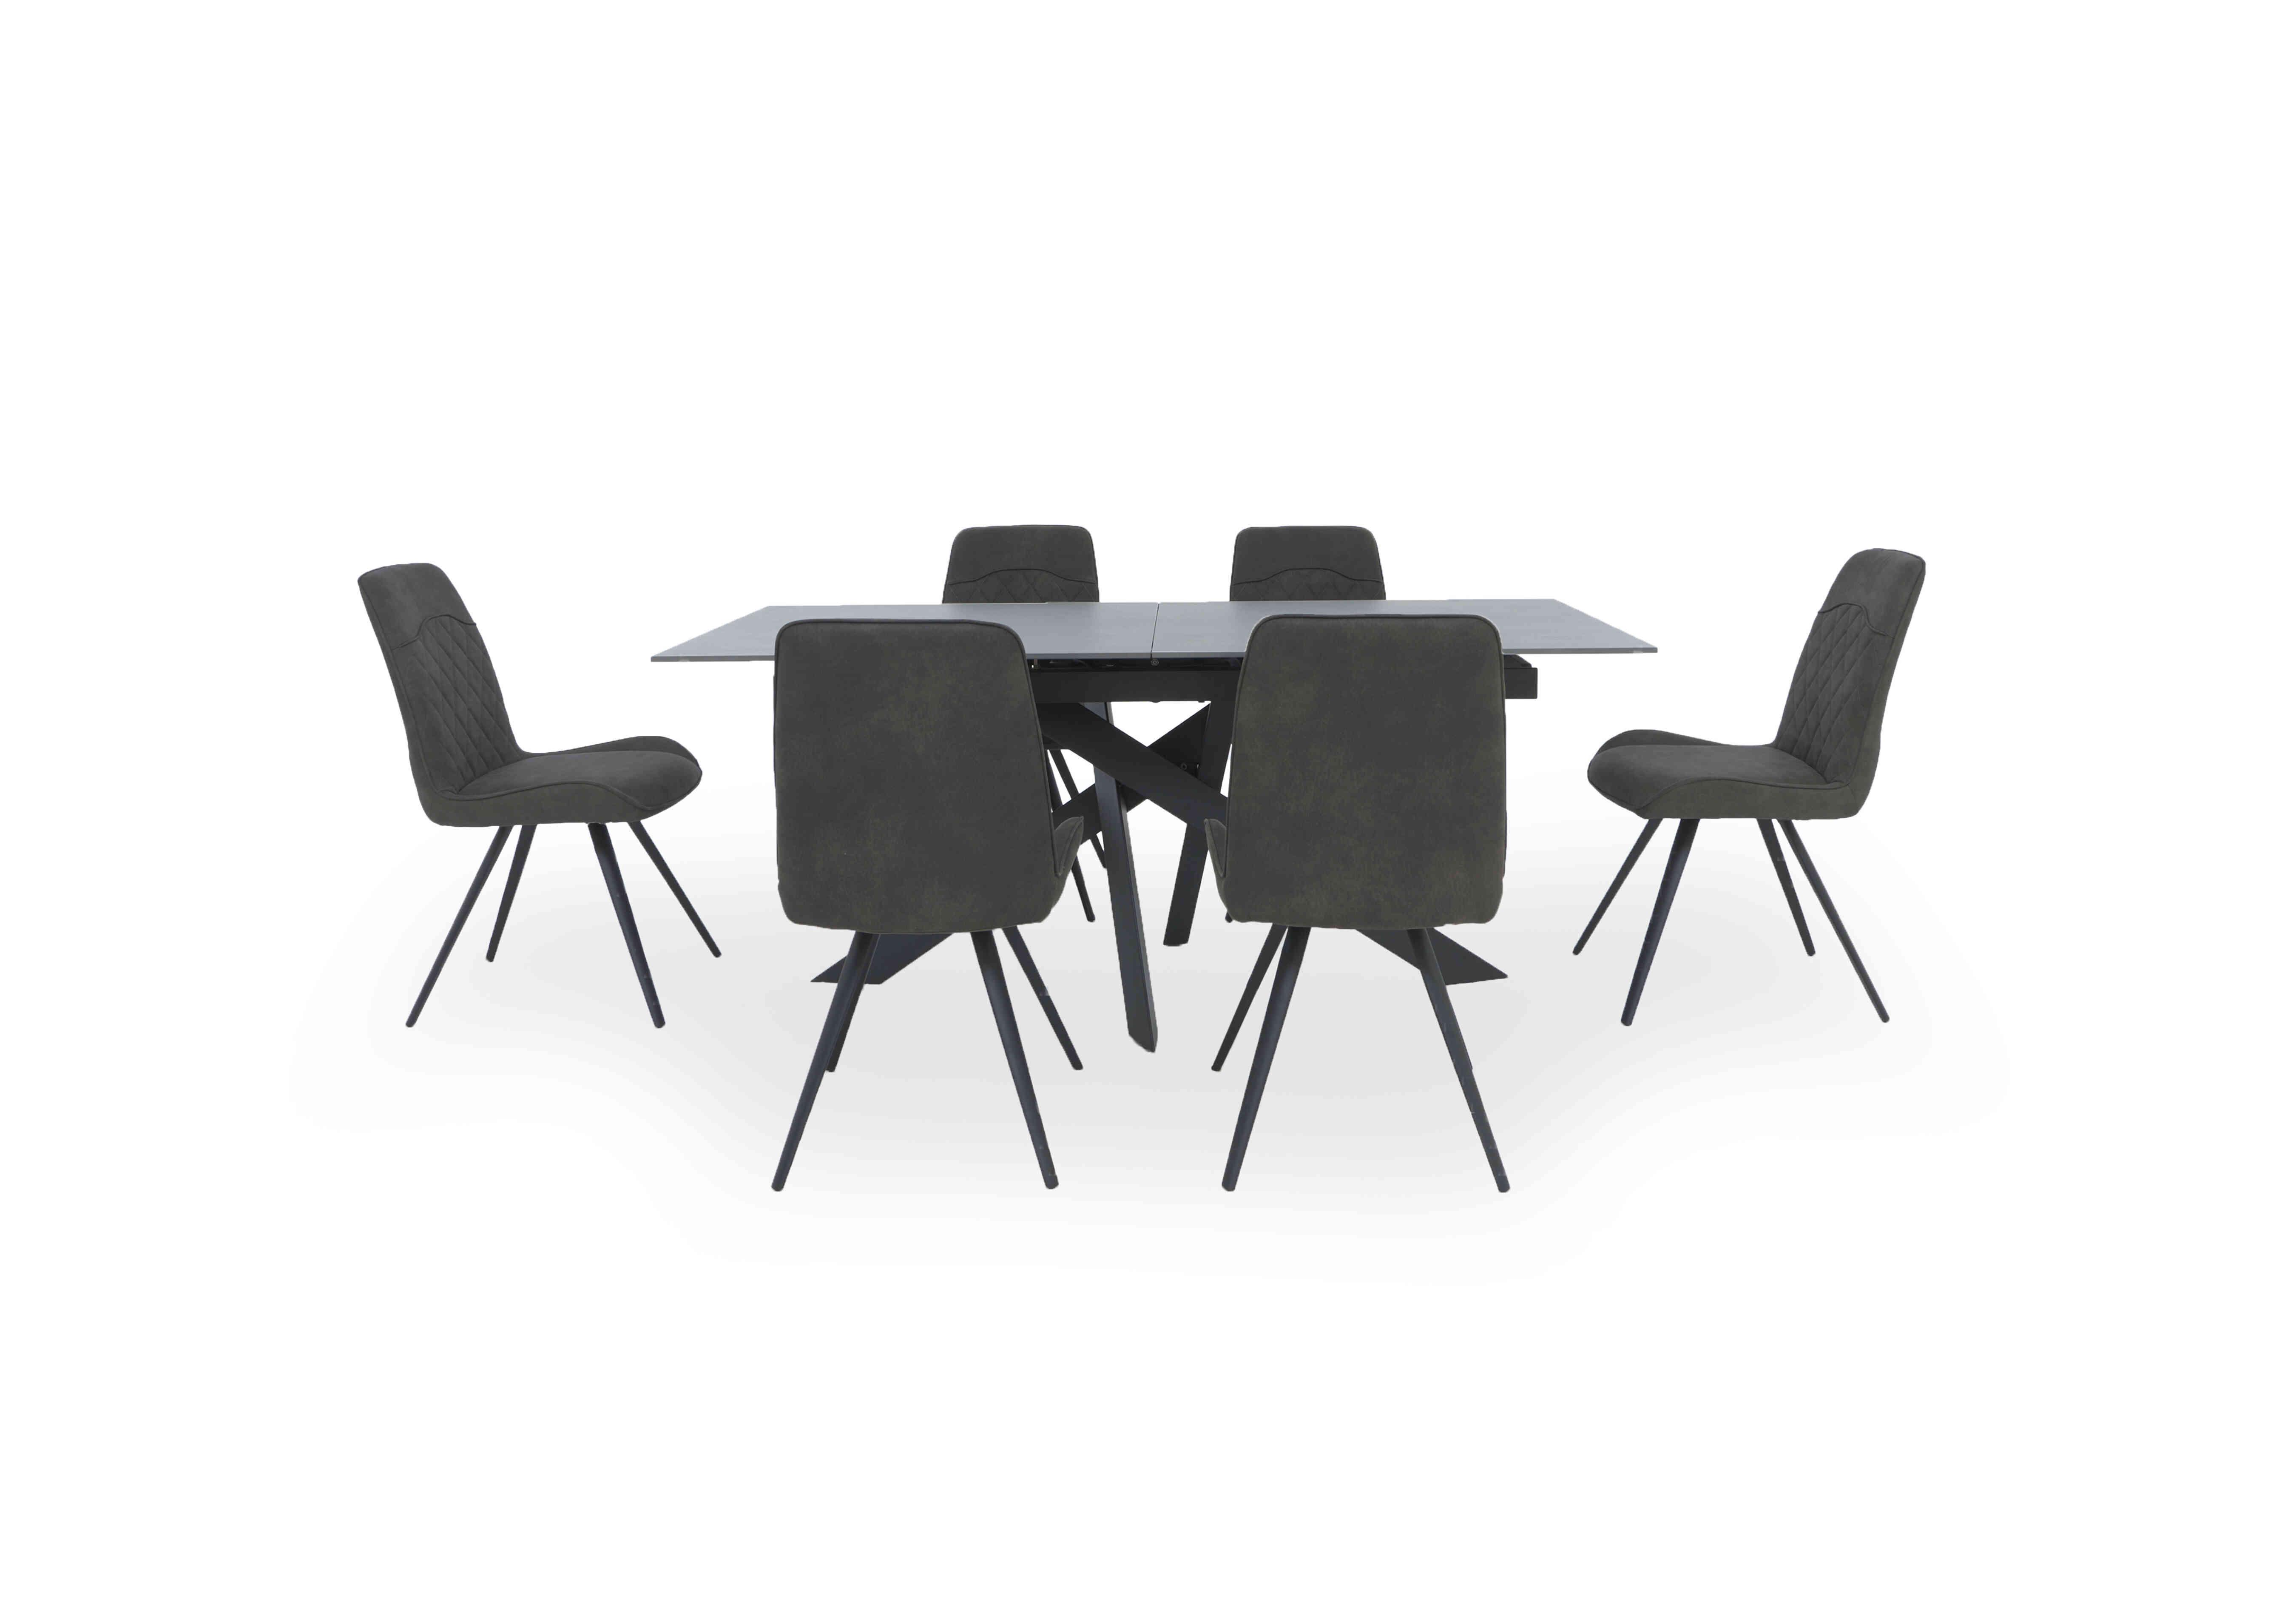 Warrior Grey Extending Dining Table with 6 Standard Dining Chairs in Grey/Grey on Furniture Village